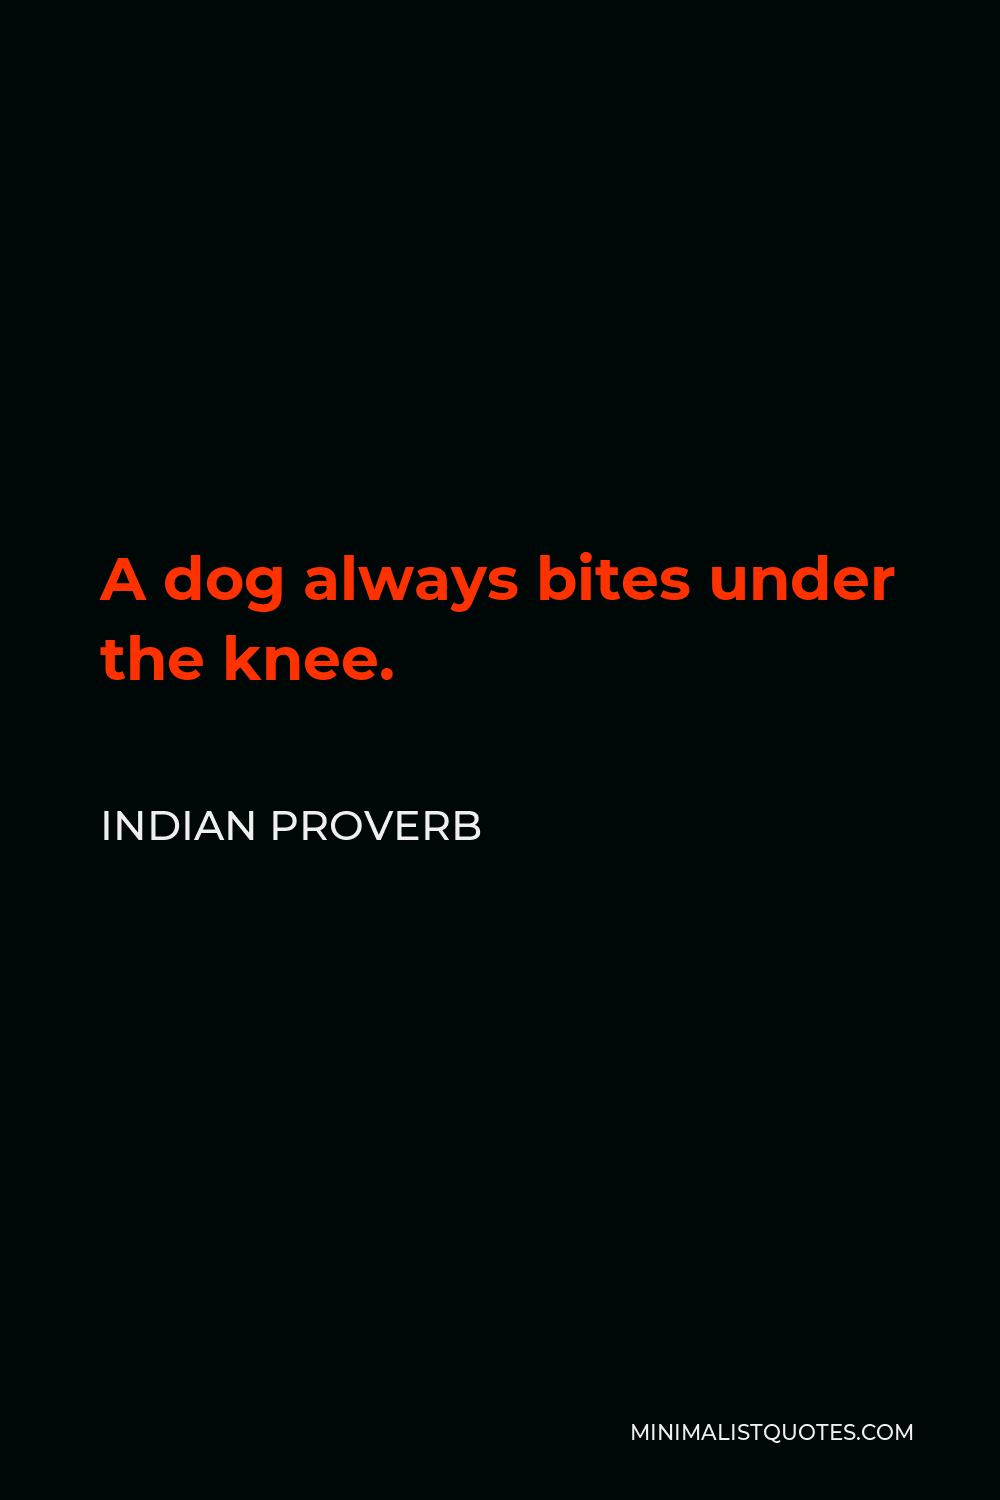 Indian Proverb Quote - A dog always bites under the knee.